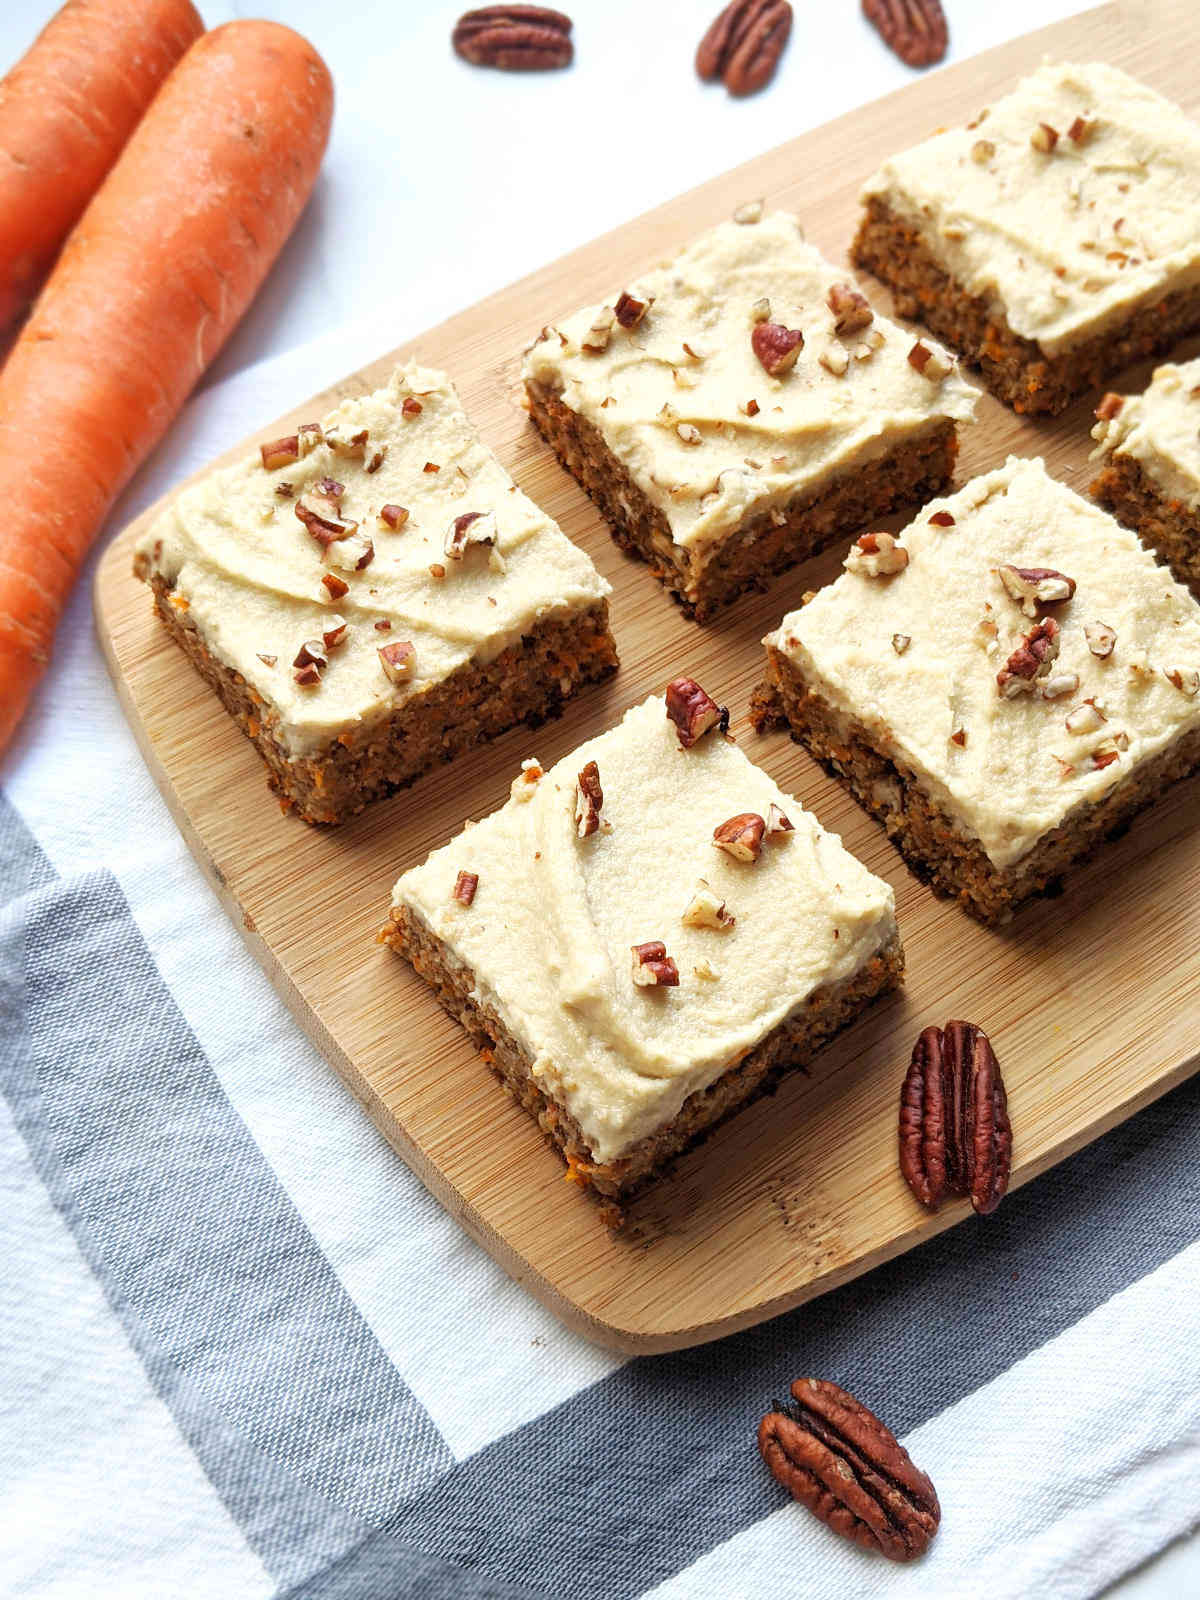 Vegan carrot cake cut into squares with frosting and chopped pecans.